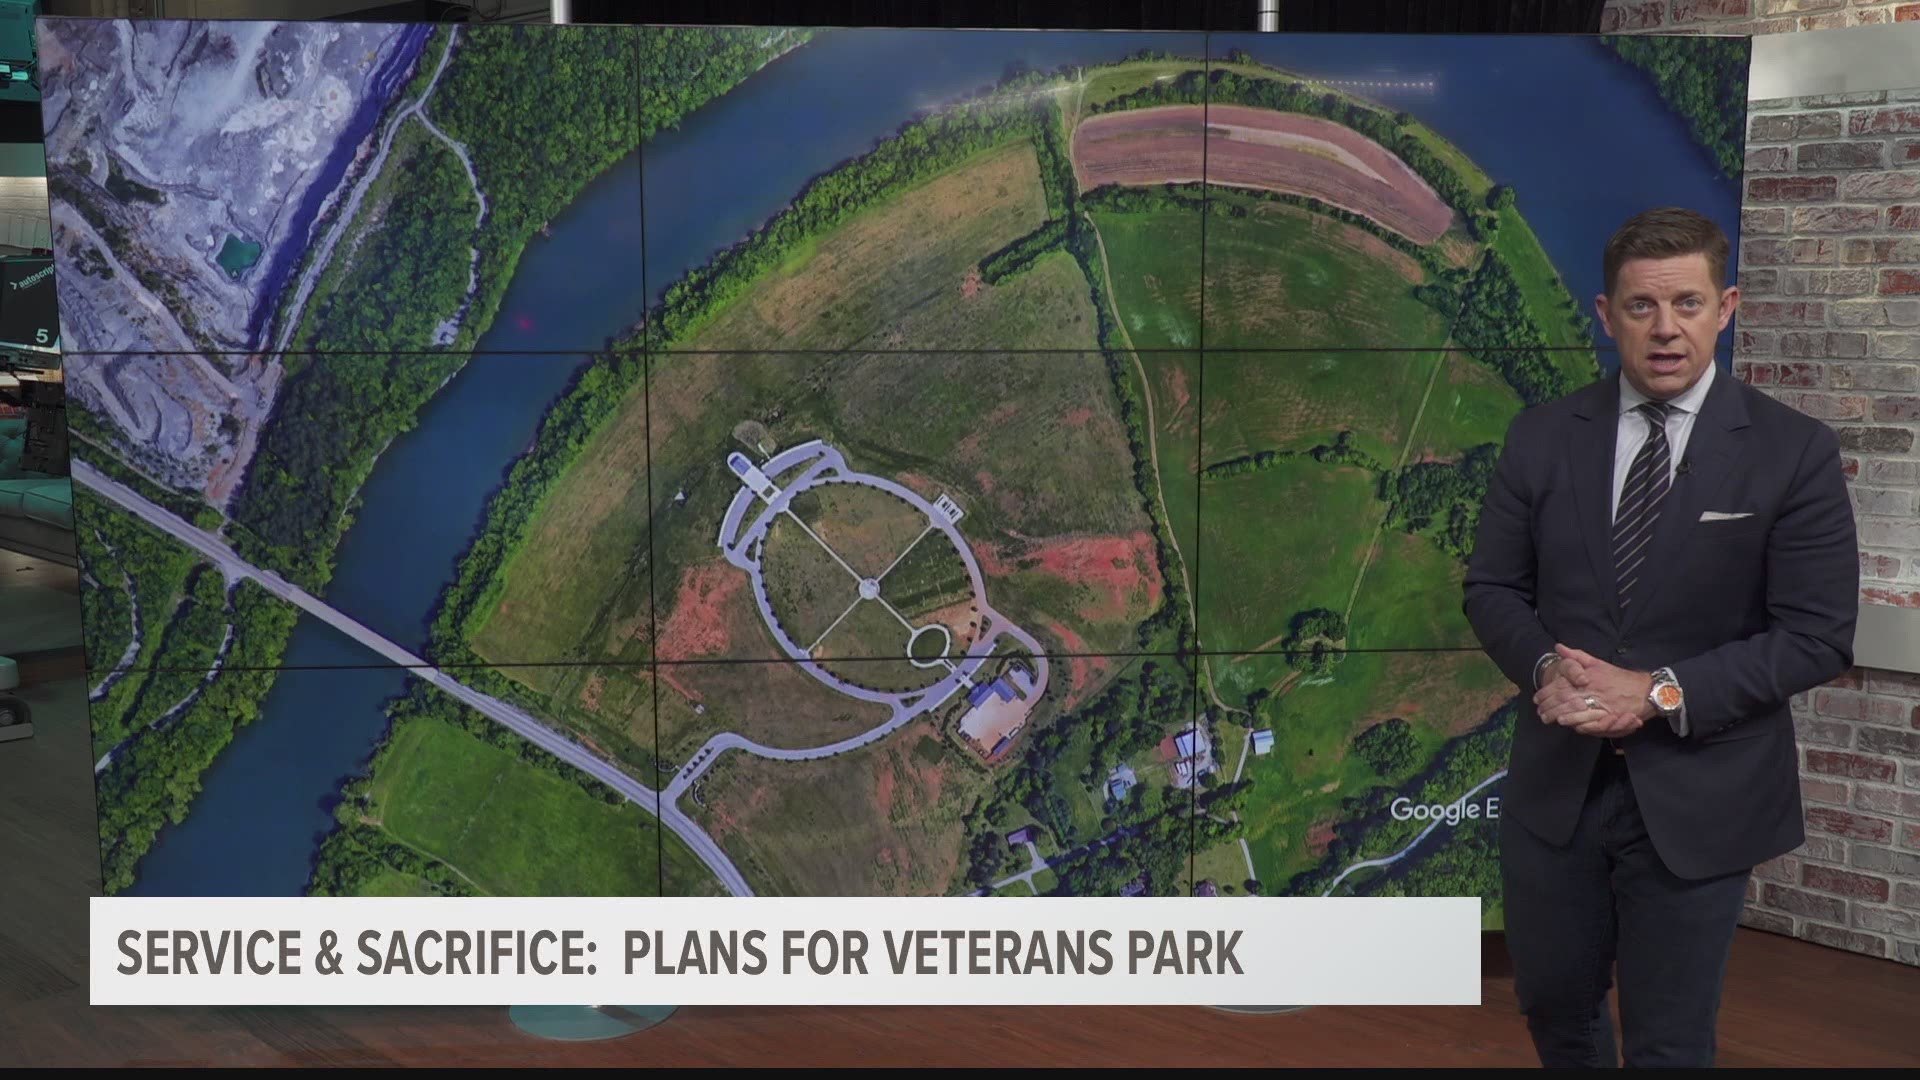 “This would be a great opportunity to thank a veteran," said Navy veteran Marilyn Childress asking for donations to build a new park in East Knox County.